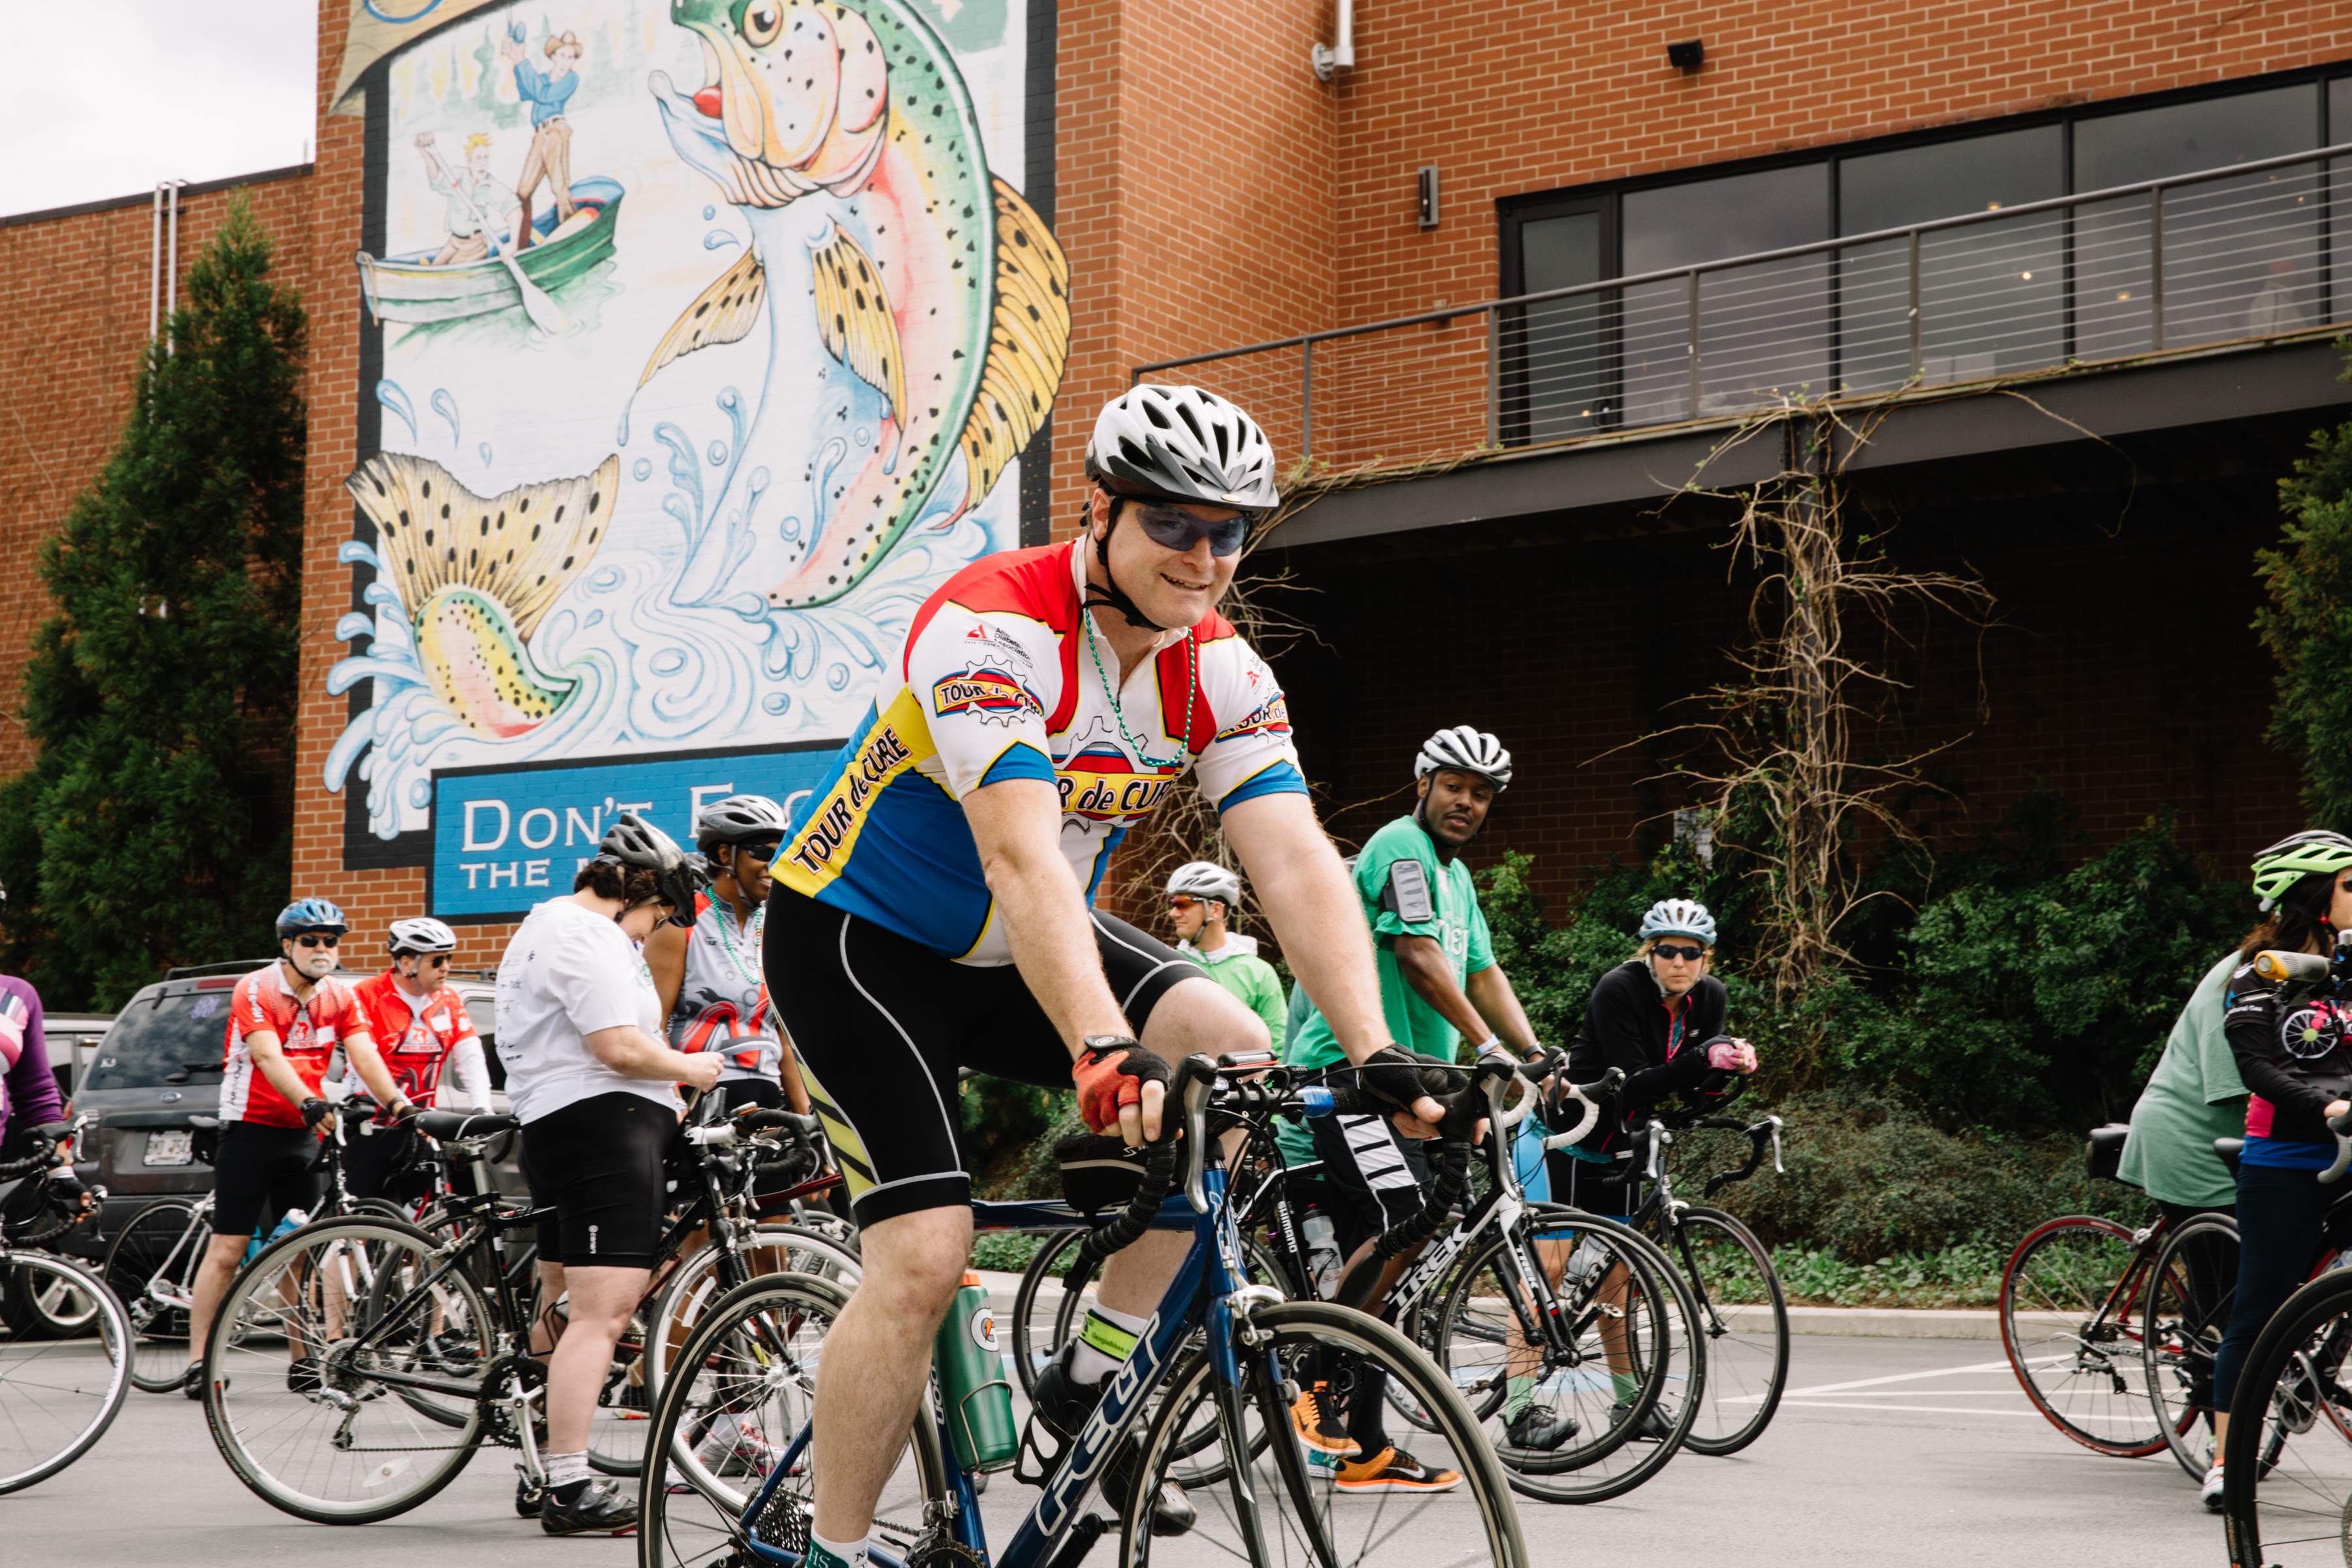 Bicyclists riding for the non-profit American Diabetes Association at a fundraiser outside of Sweetwater Brewery in Atlanta